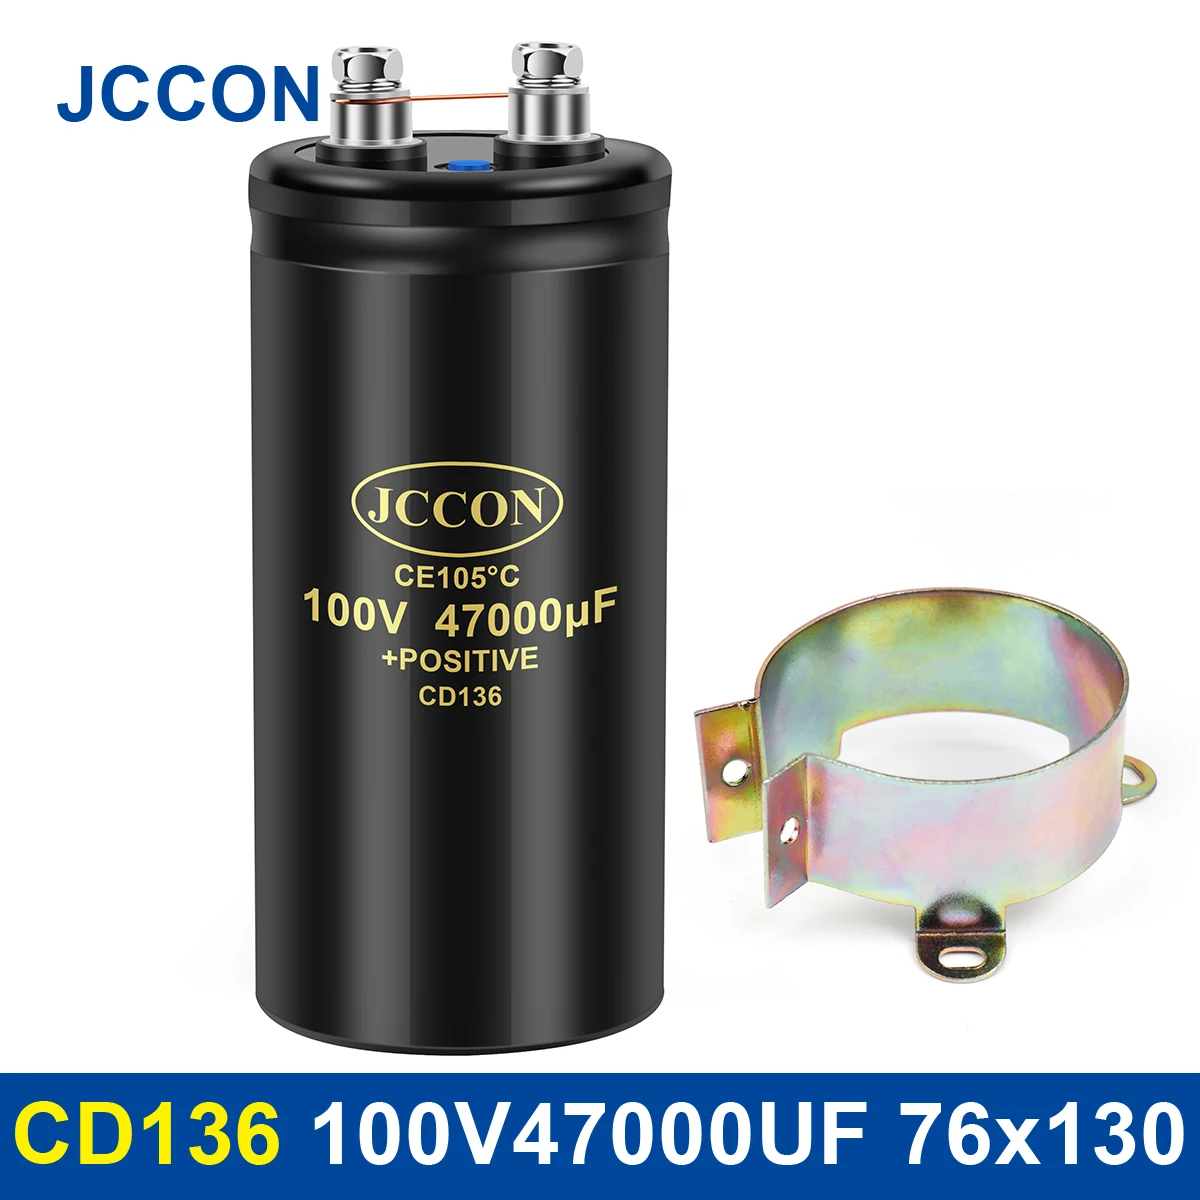 JCCON Bolt Electrolytic Capacitor 100V47000UF 76x130mm CD136 Screw Capacitors CE105℃ Original &Brand New With Bracket 2000Hours